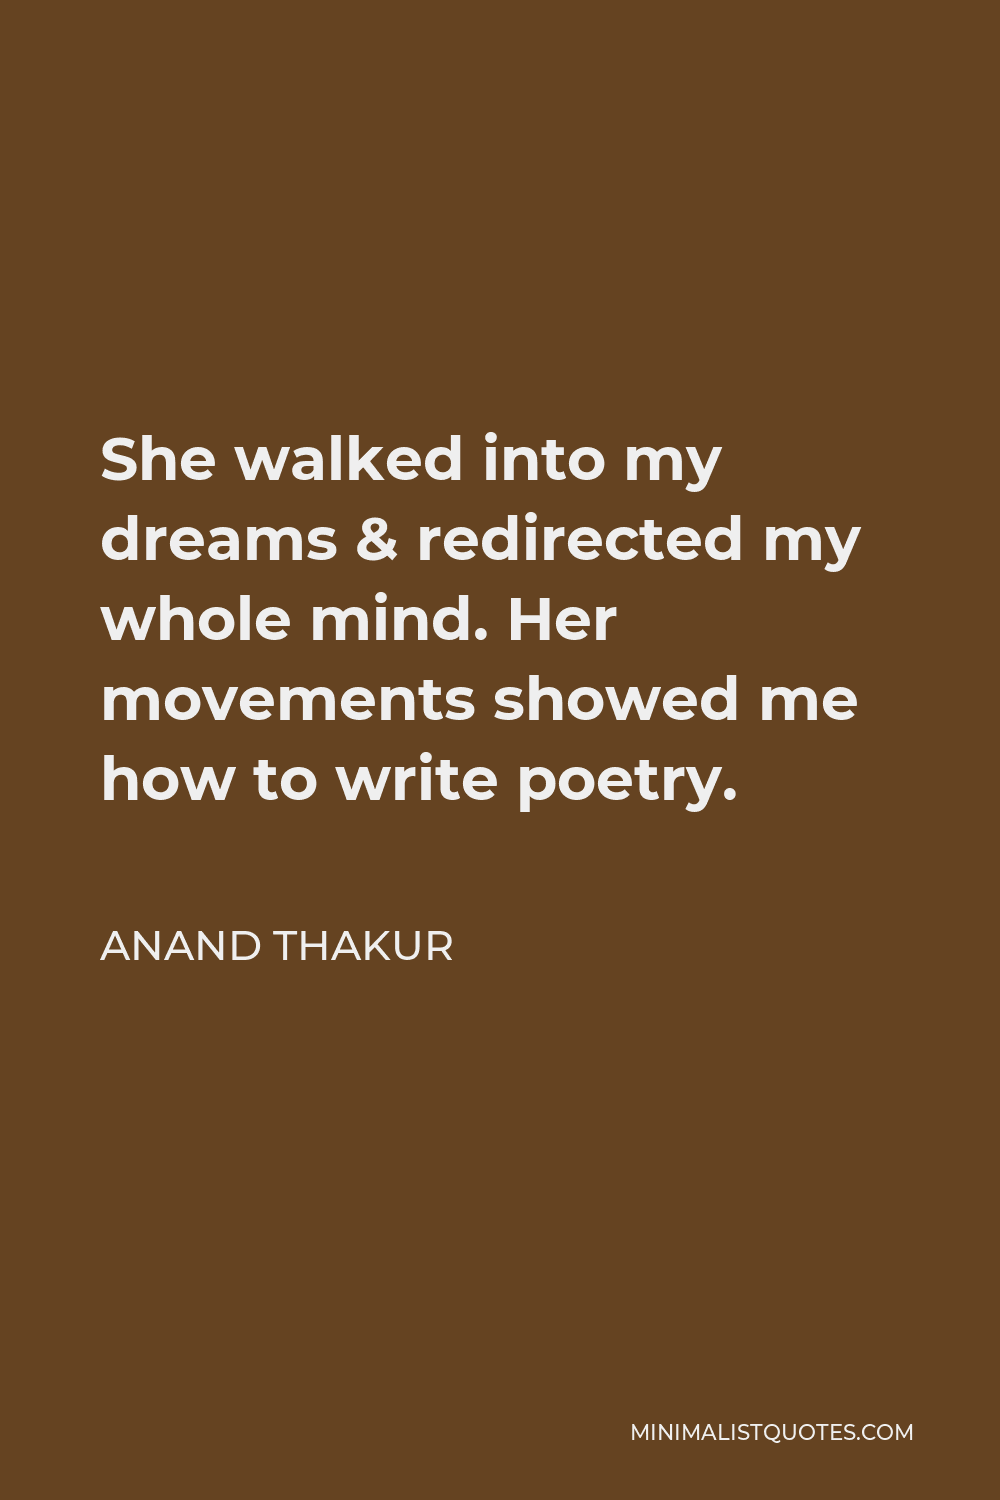 Anand Thakur Quote - She walked into my dreams & redirected my whole mind. Her movements showed me how to write poetry.